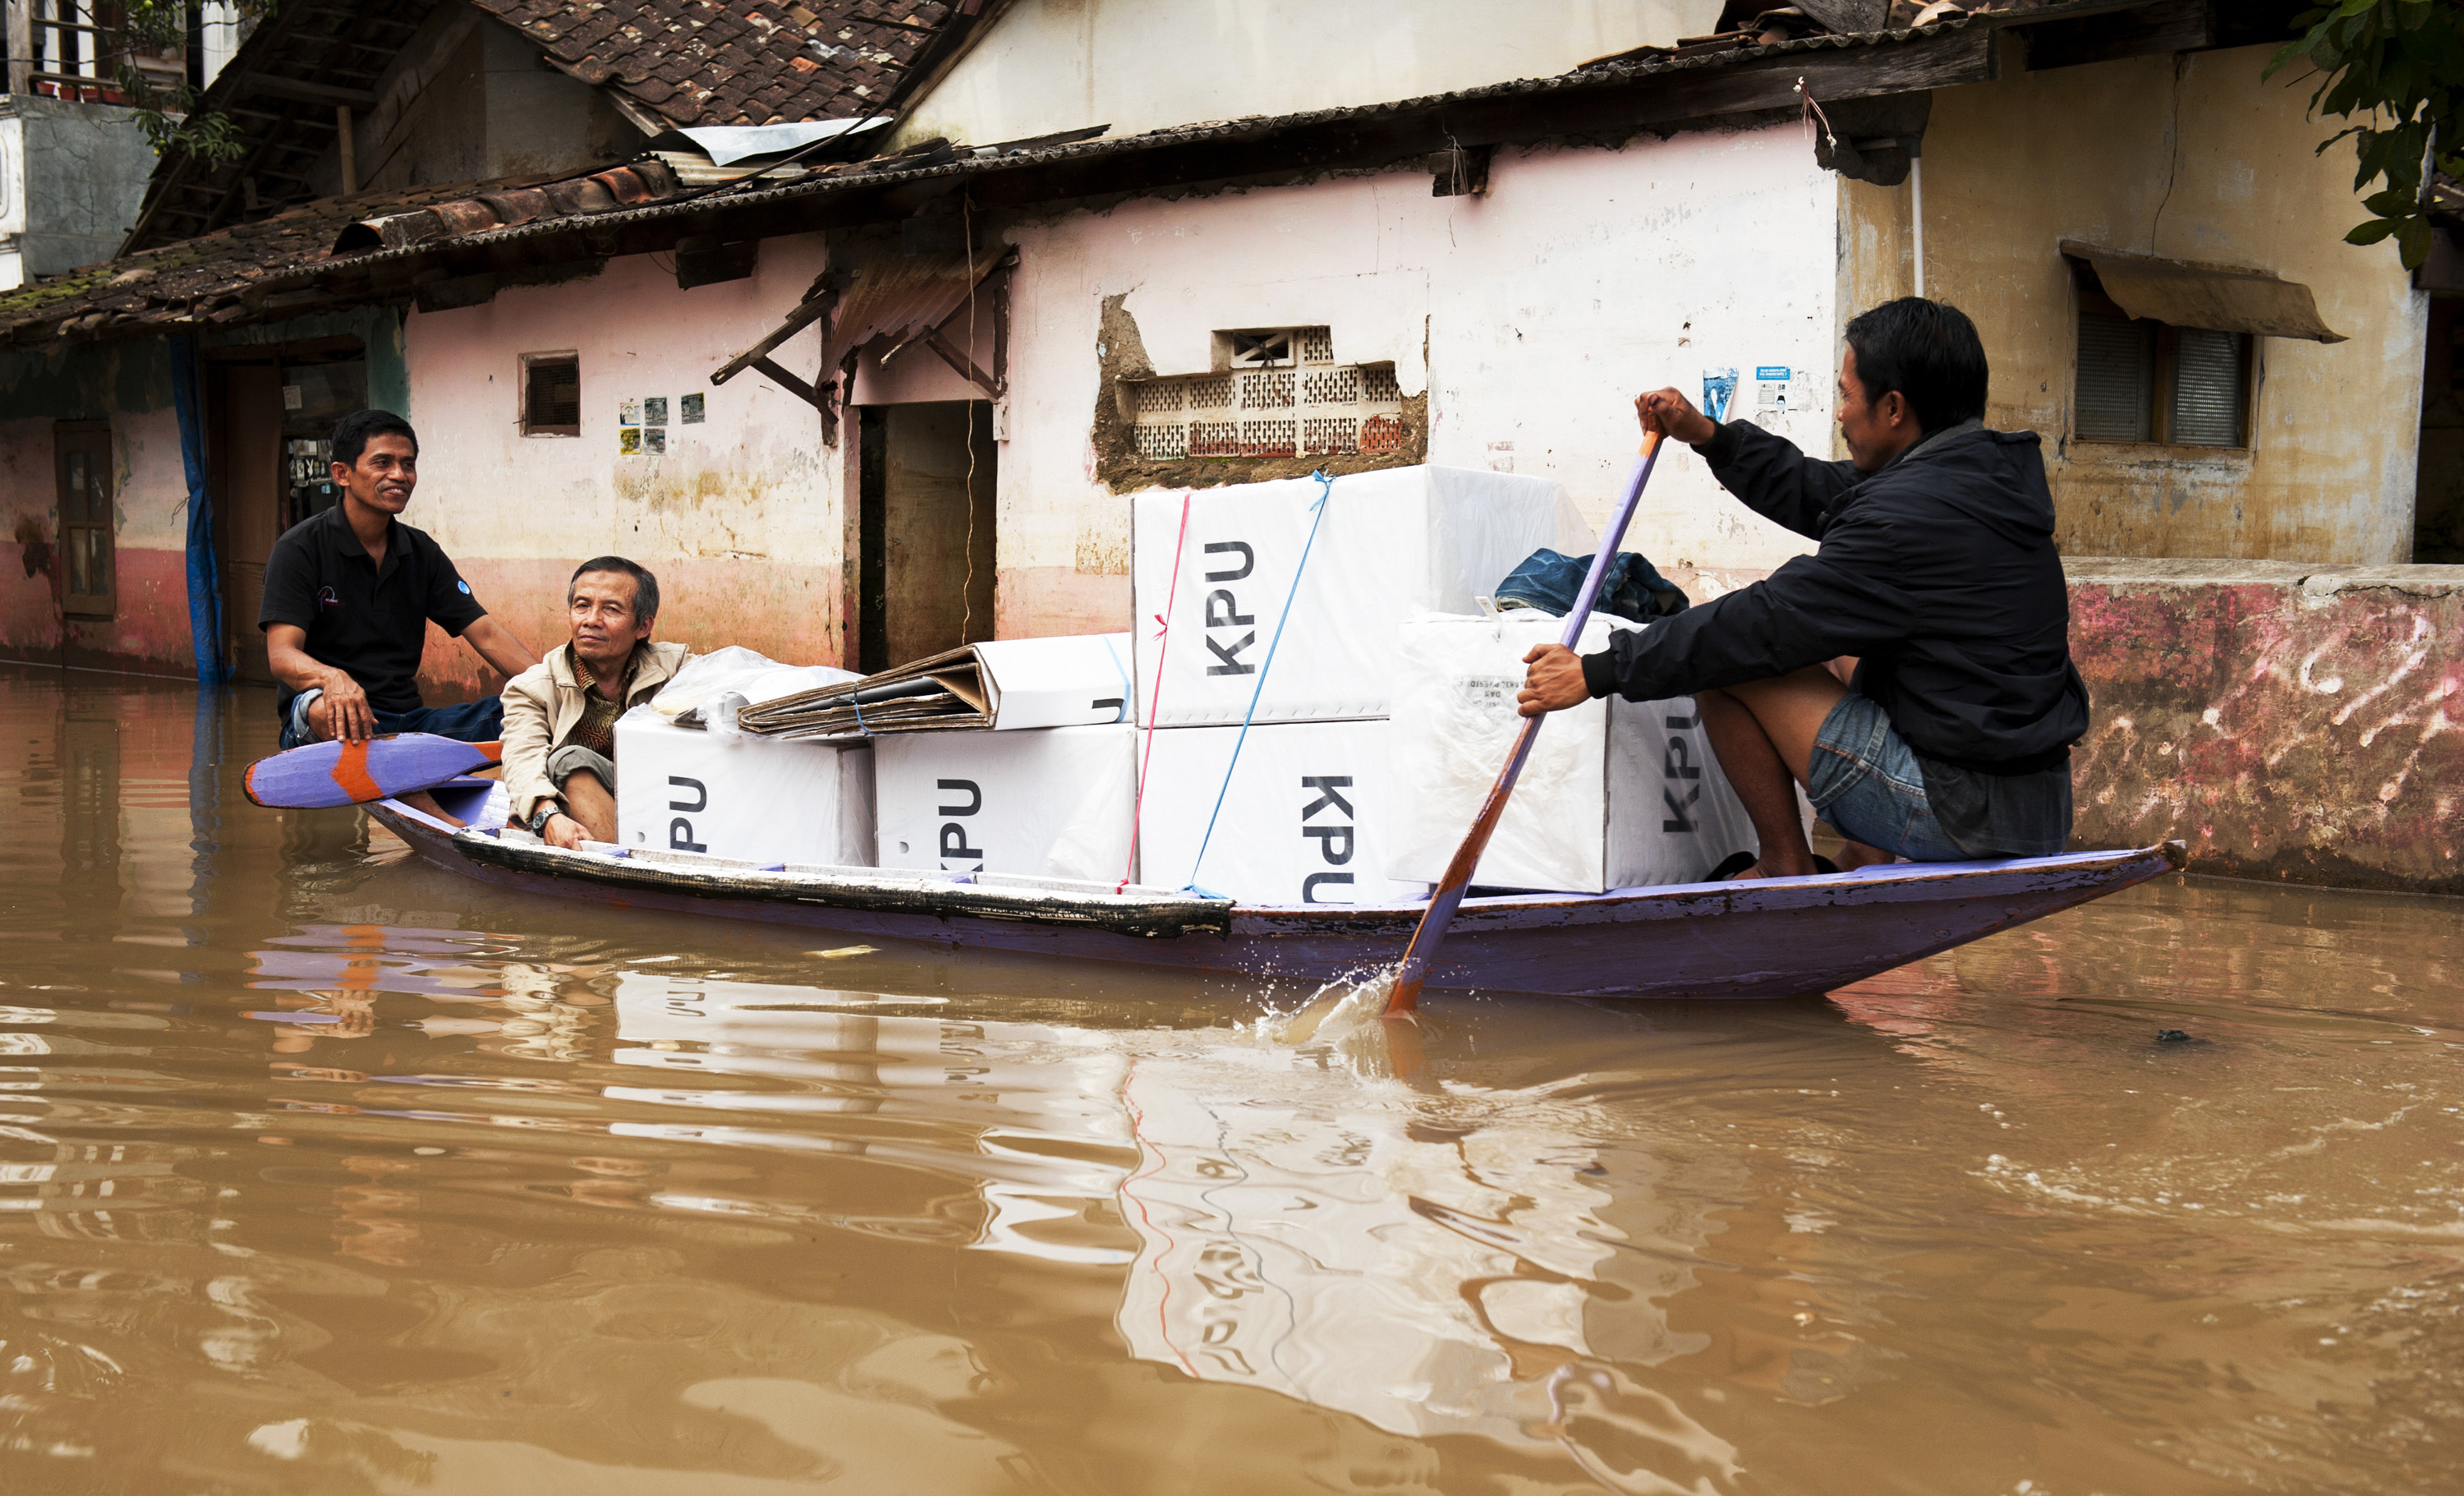 Indonesian election officials transport ballot boxes from polling stations on a boat as they wade through flood water in Bandung, West Java, Indonesia, 18 April 2019. Credit: EPA-EFE/IQBAL KUSUMADIREZZA